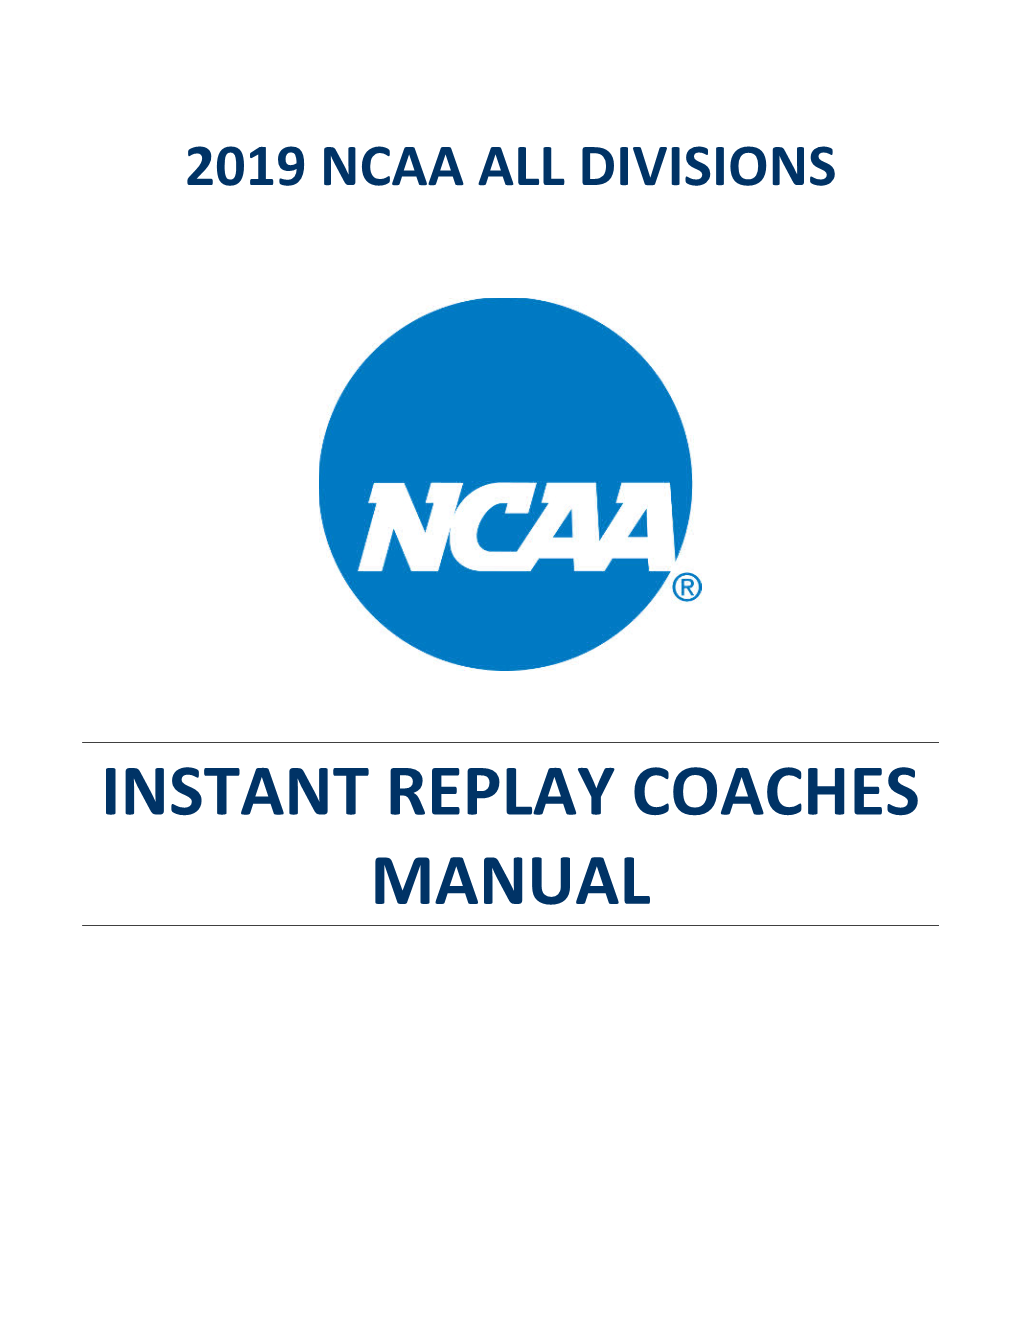 NCAA Instant Replay